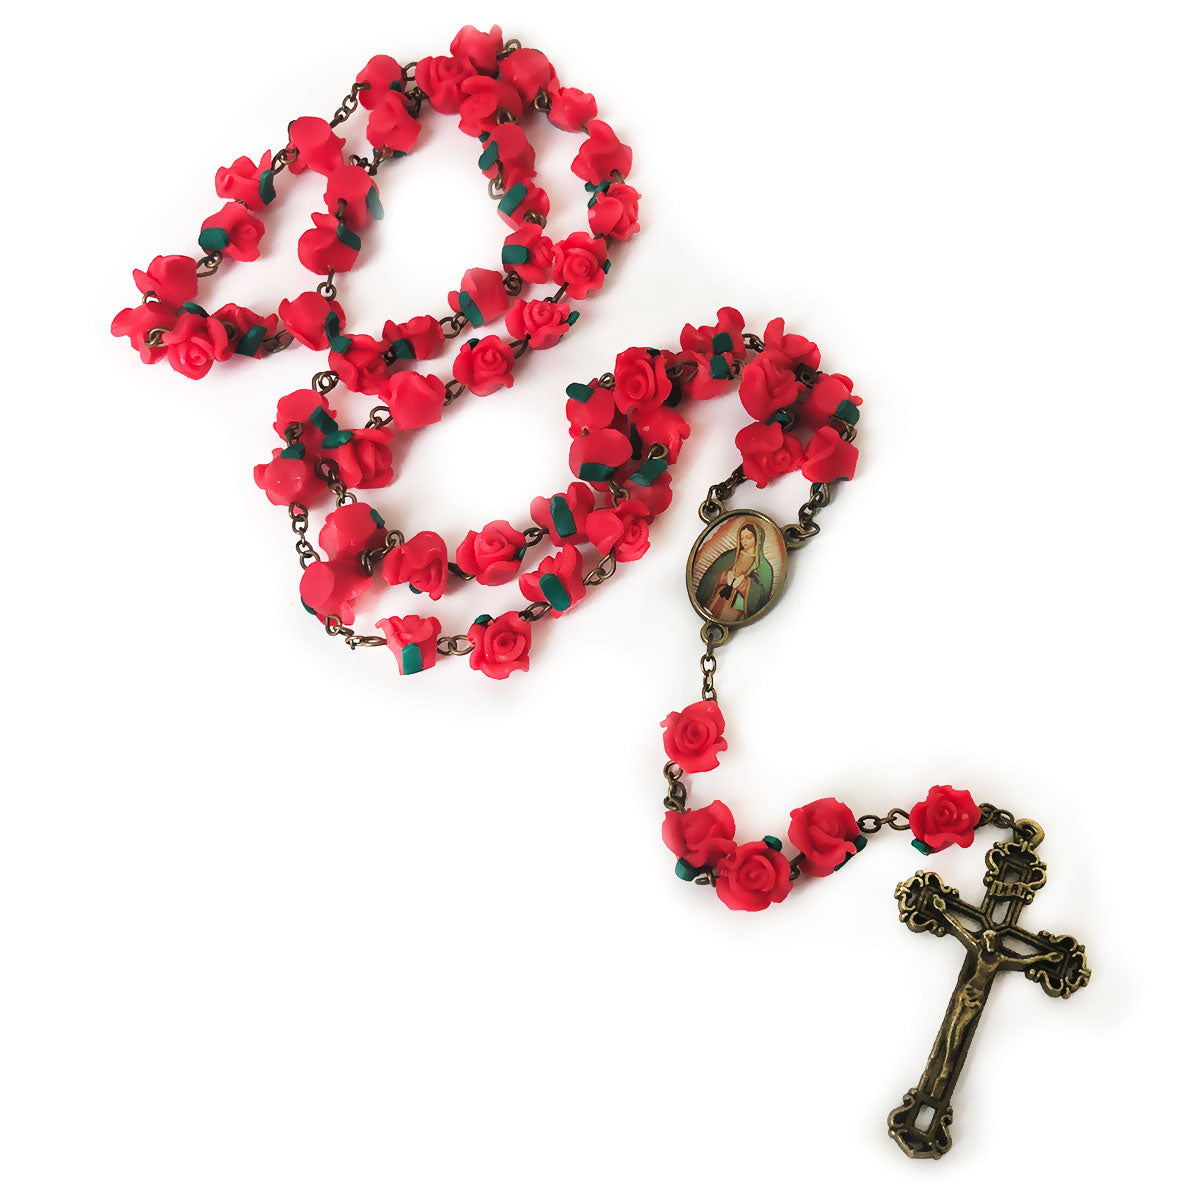 Our Lady of Guadalupe Red Rose Garden Rosary in Antique Bronze Finish with Velvet Rosary Pouch - Deluxe Boxed